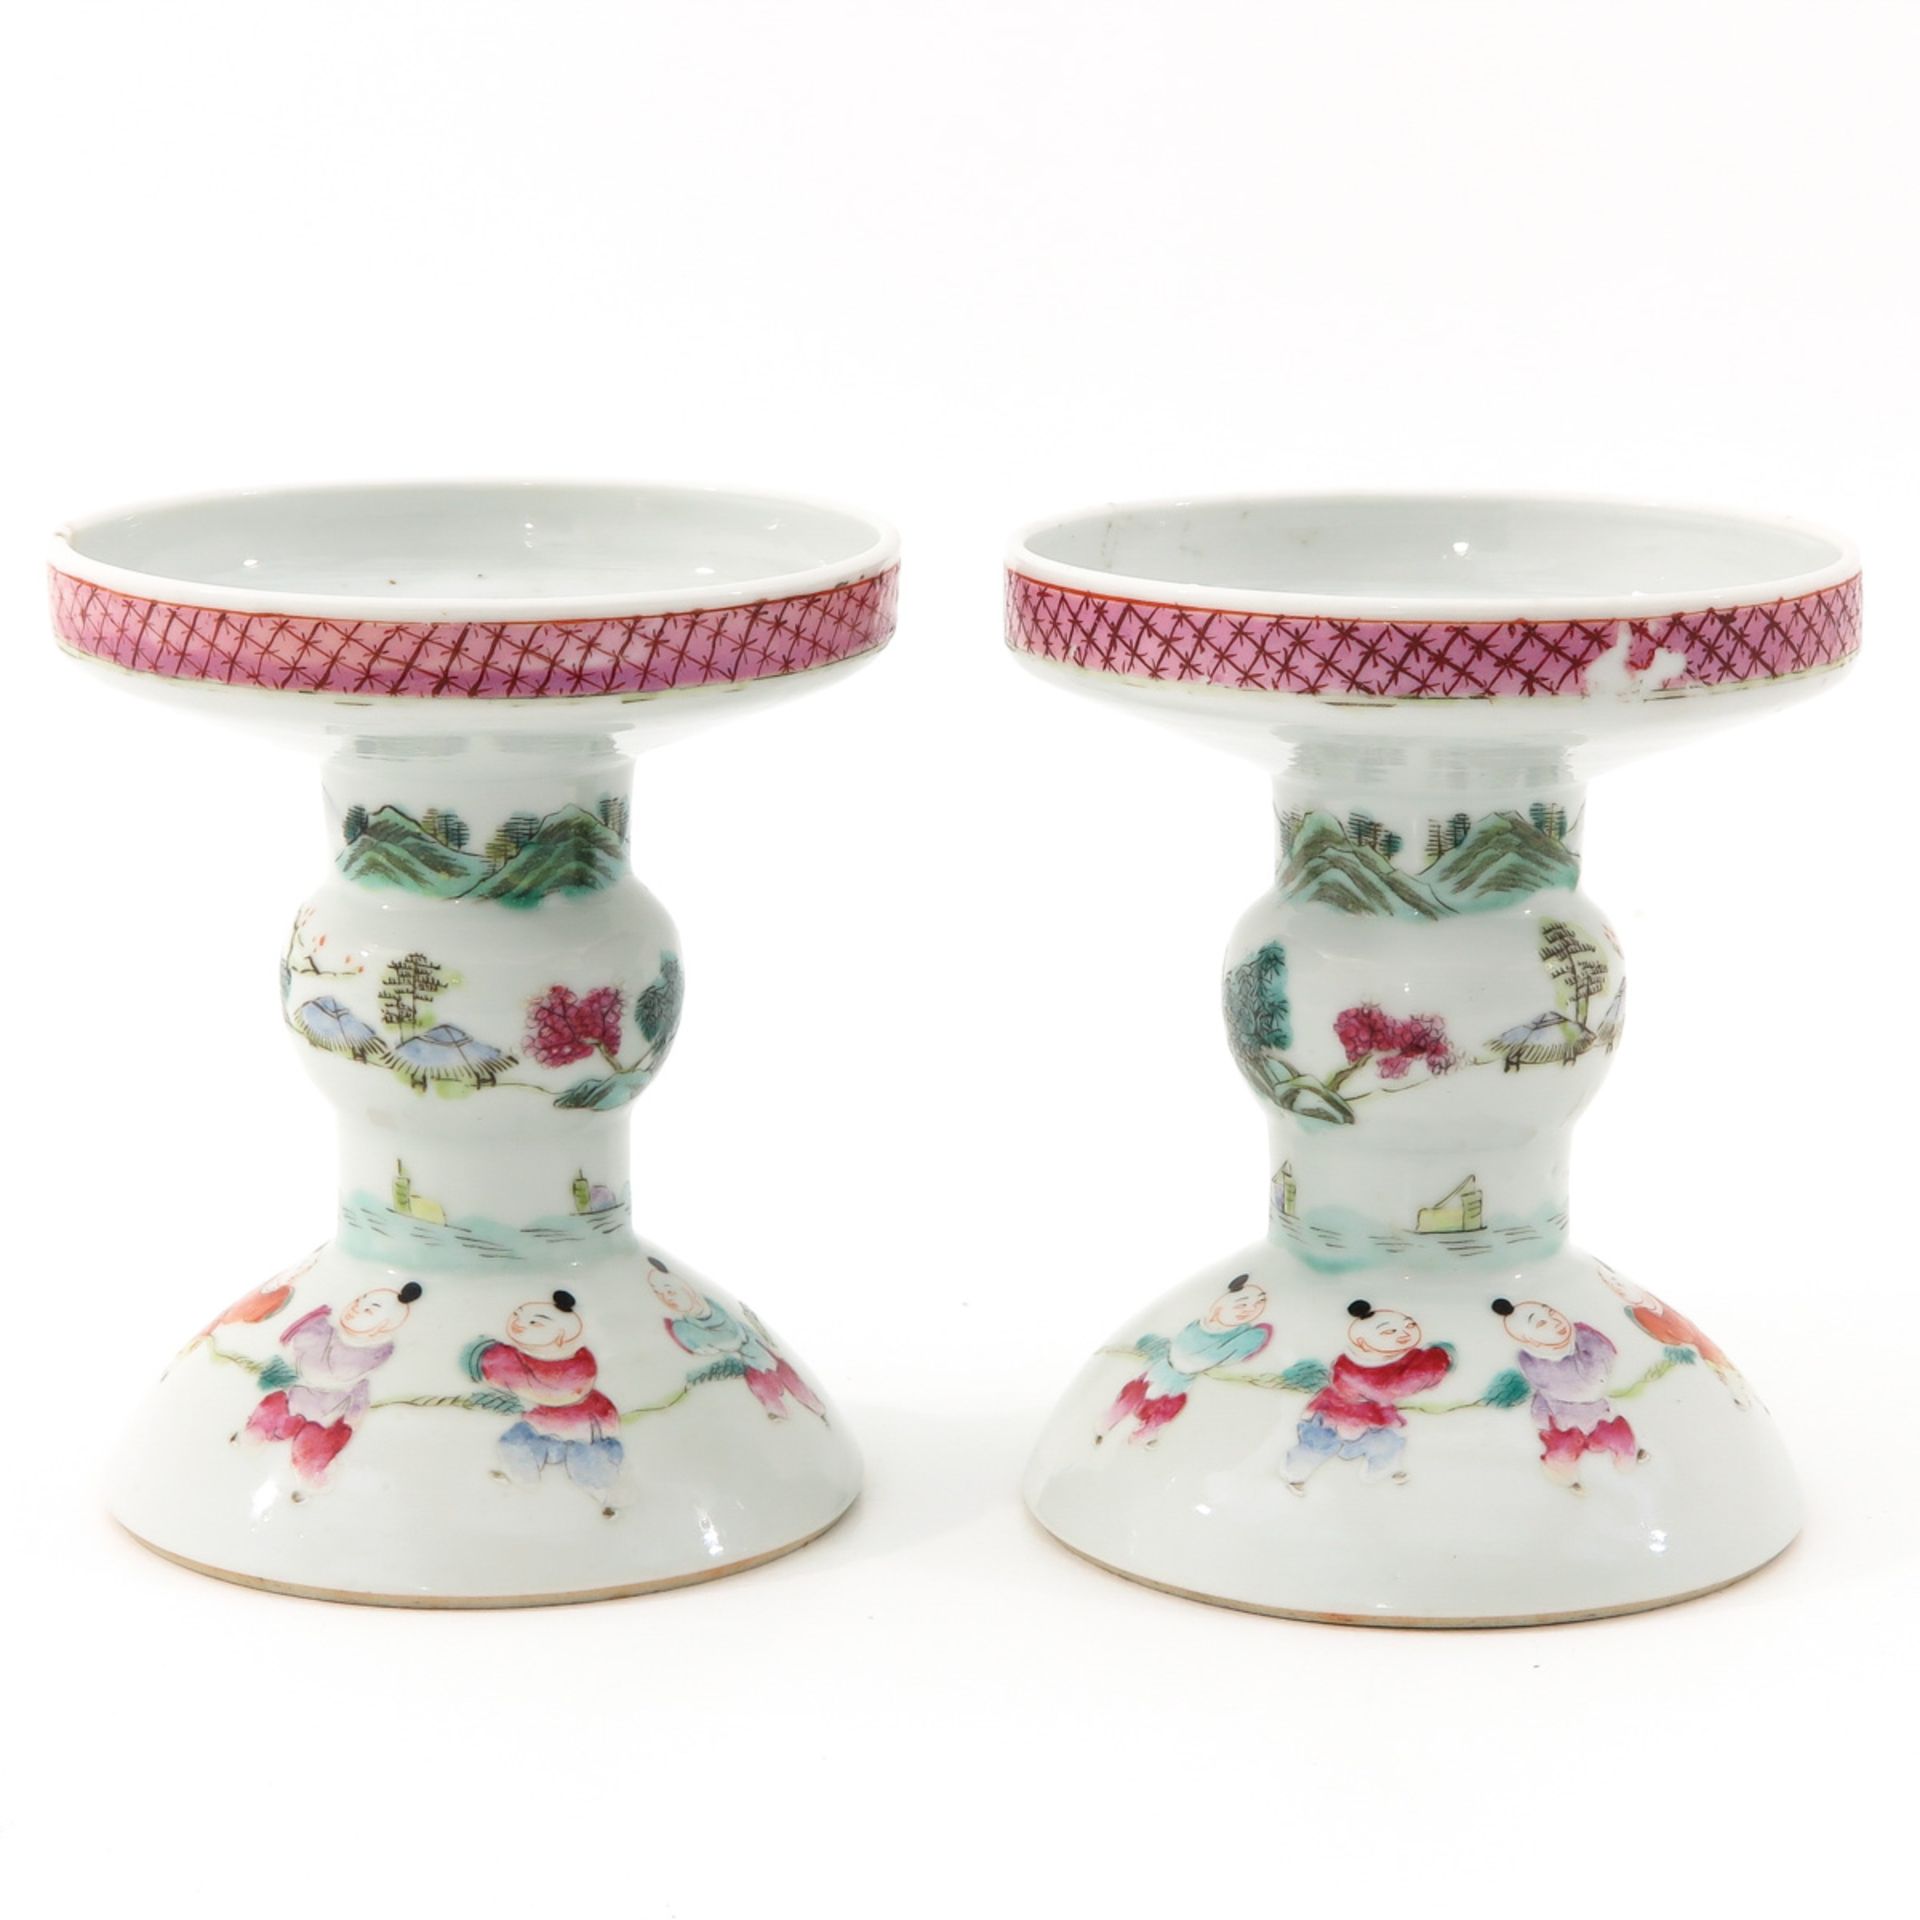 A Pair of Famille Rose Candlesticks